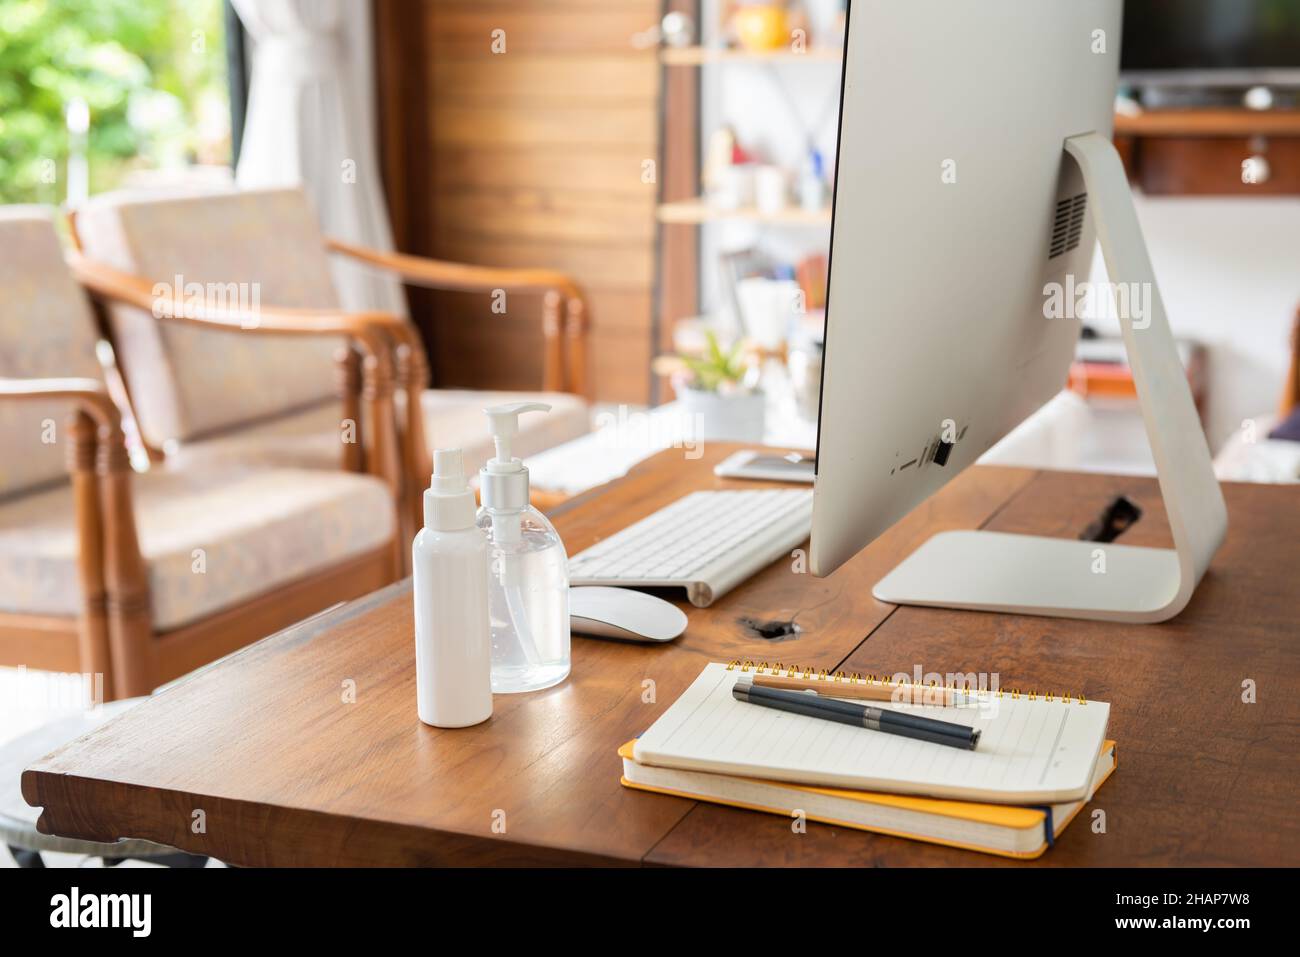 Work from home office gadget hygiene with computer and hand sanitizer protection from coronavirus outbreak or Covid-19  in living room Stock Photo